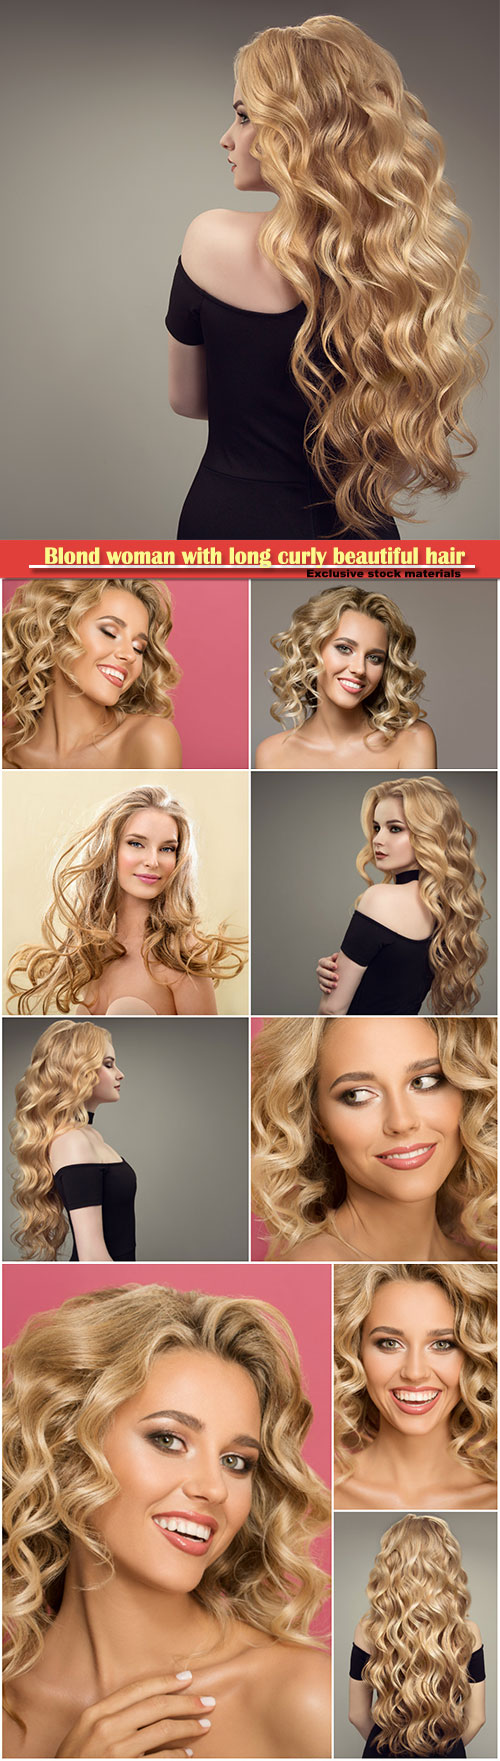 Blond woman with long curly beautiful hair